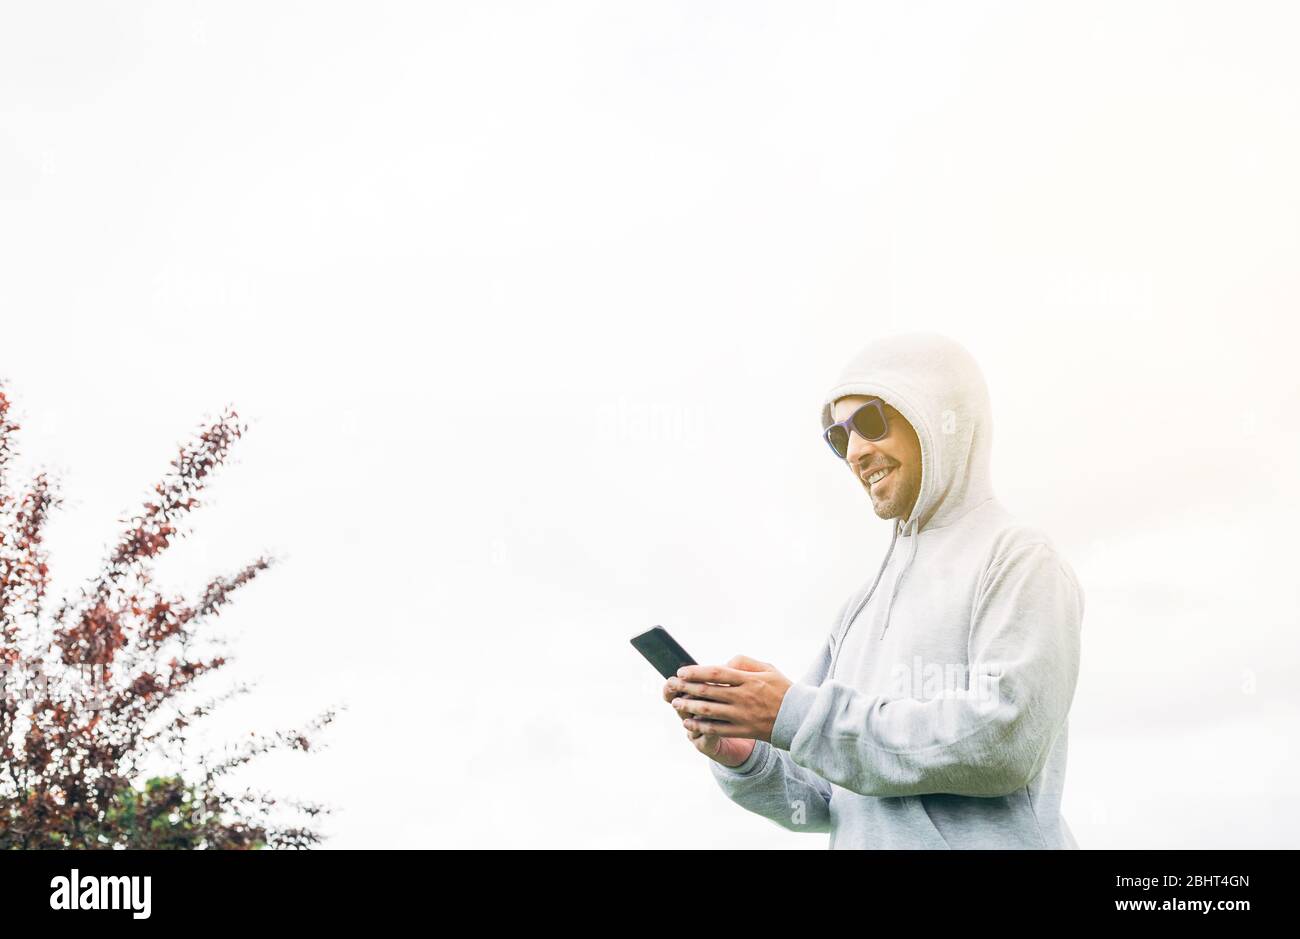 Young man in gray sweatshirt and blue sunglasses holding cell phone in his hands and smiling with trees and a white background Stock Photo